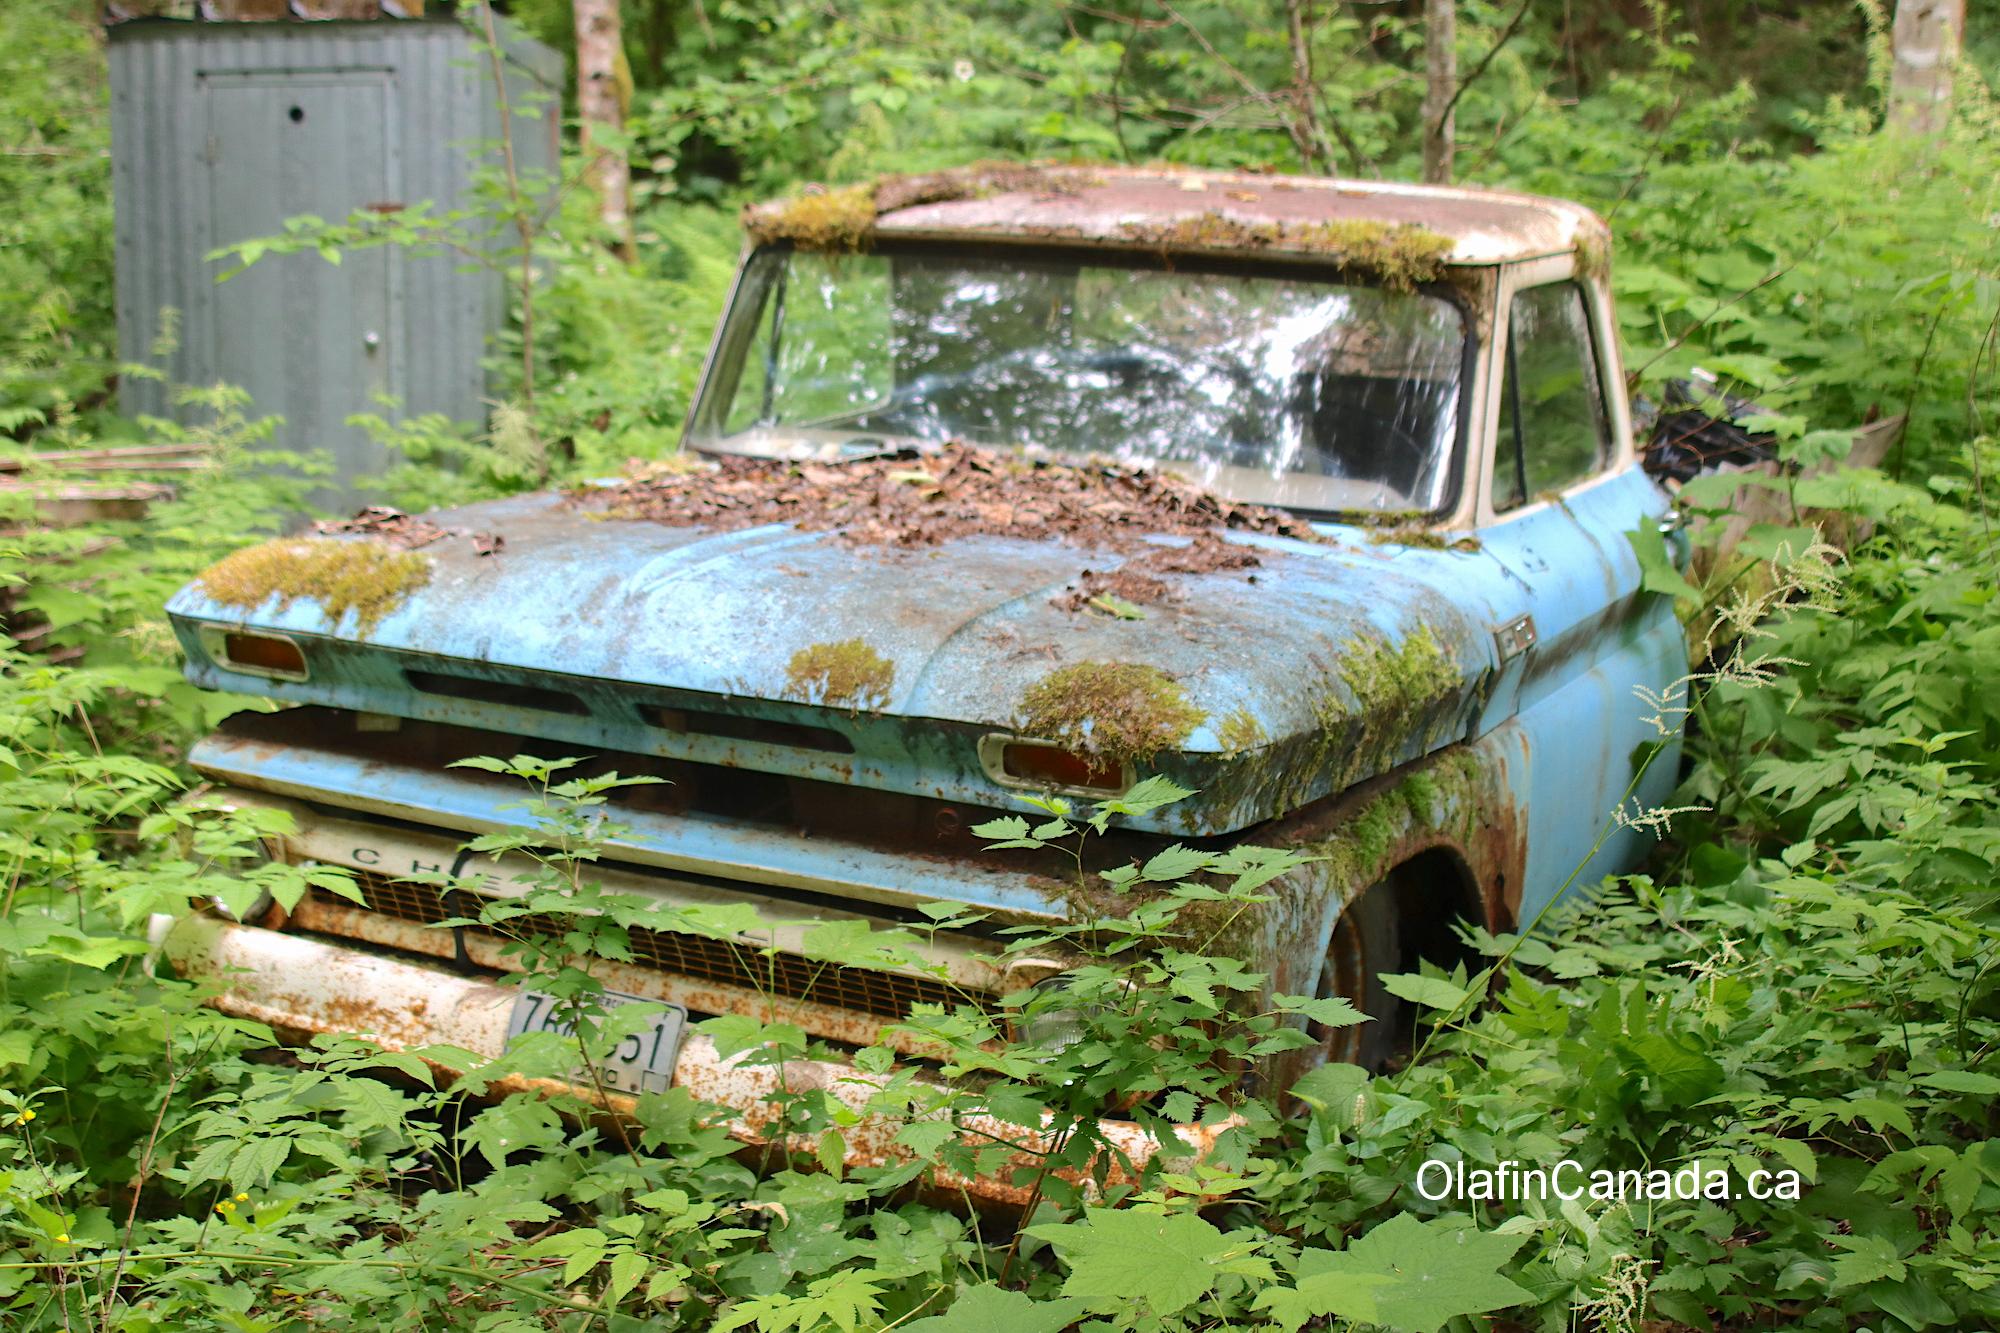 Chevrolet pick up from the 1960s in Alice Arm BC #olafincanada #britishcolumbia #discoverbc #abandonedbc #alicearm #pickup #truck